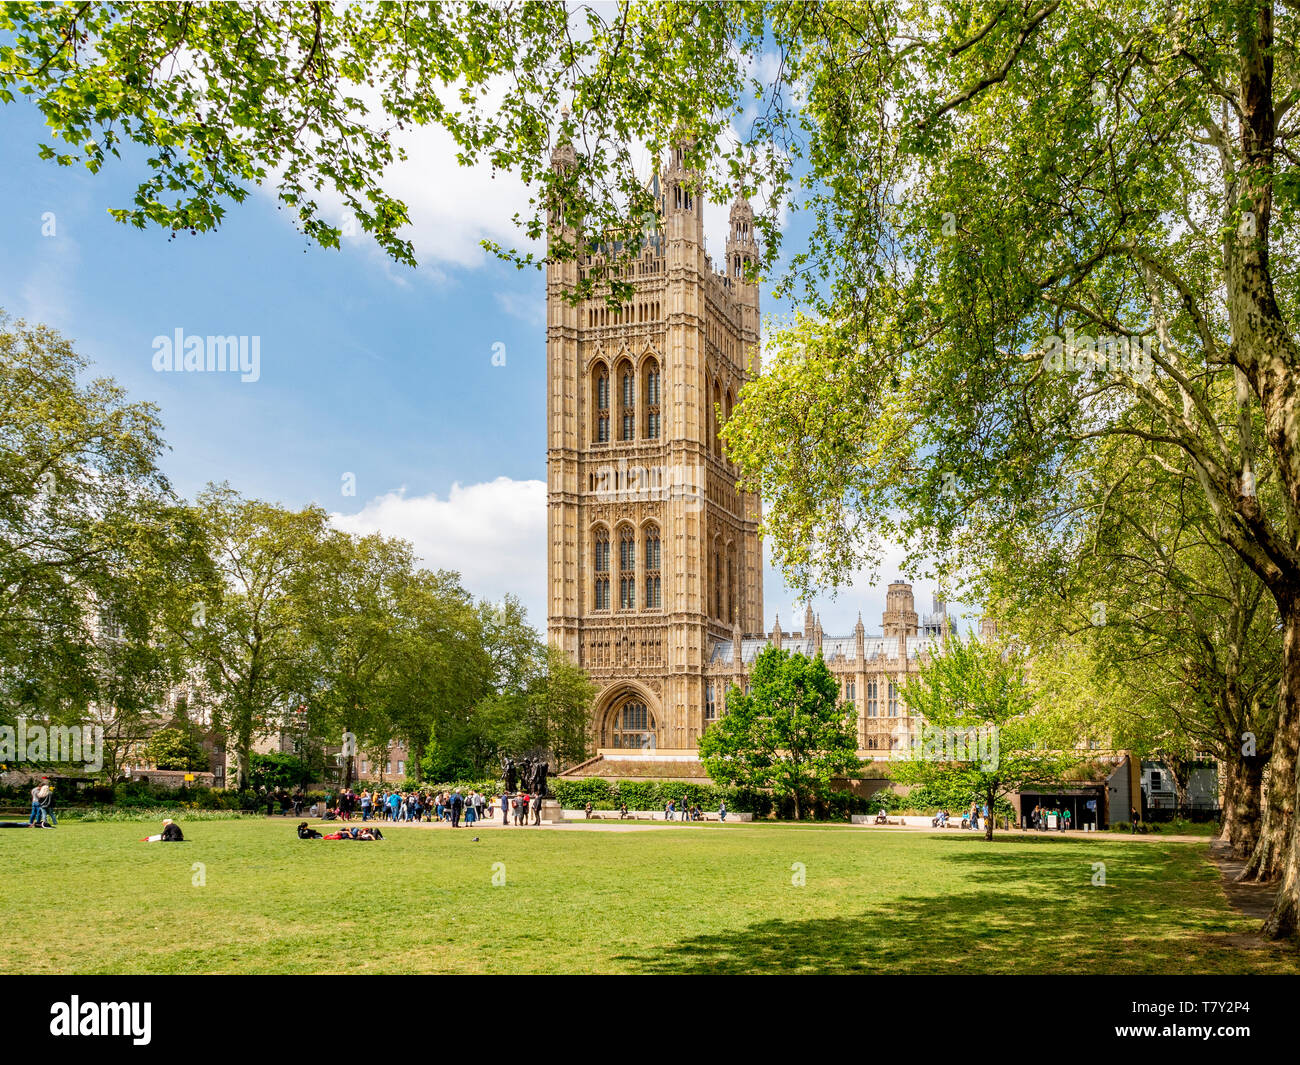 Victoria Tower Gardens and Victoria Tower, Palace of Westminster, London, UK. Stock Photo